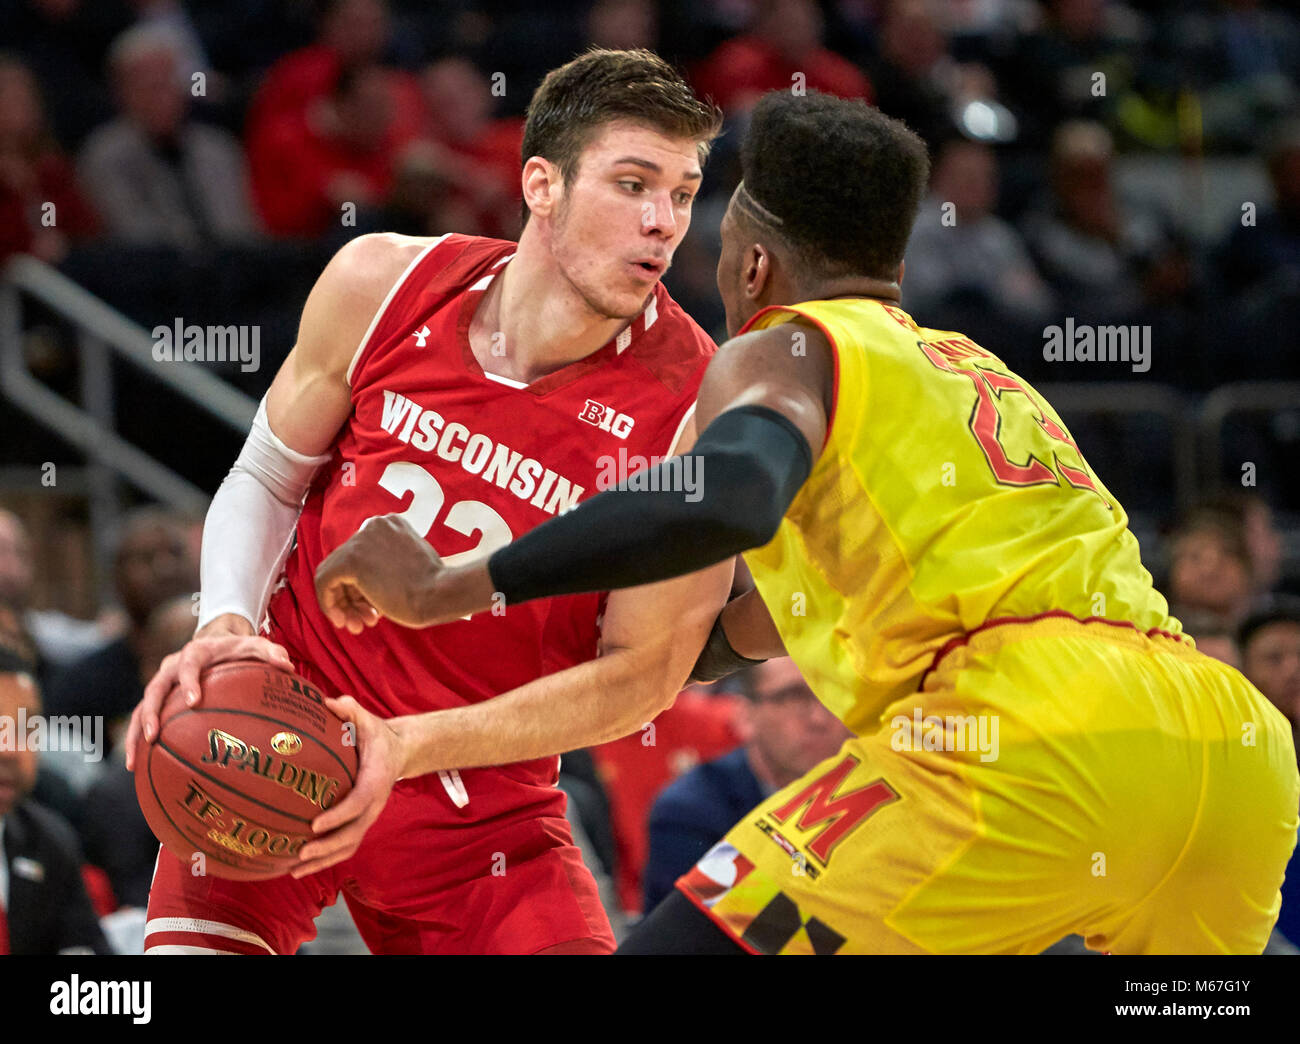 New York, New York, USA. 1st Mar, 2018. Wisconsin Badgers forward Ethan Happ (22) gets pressure from Maryland Terrapins forward Bruno Fernando (23) in the first half during the second round of Big Ten Conference Tournament play at Madison Square Garden in New York City. Duncan Williams/CSM/Alamy Live News Stock Photo